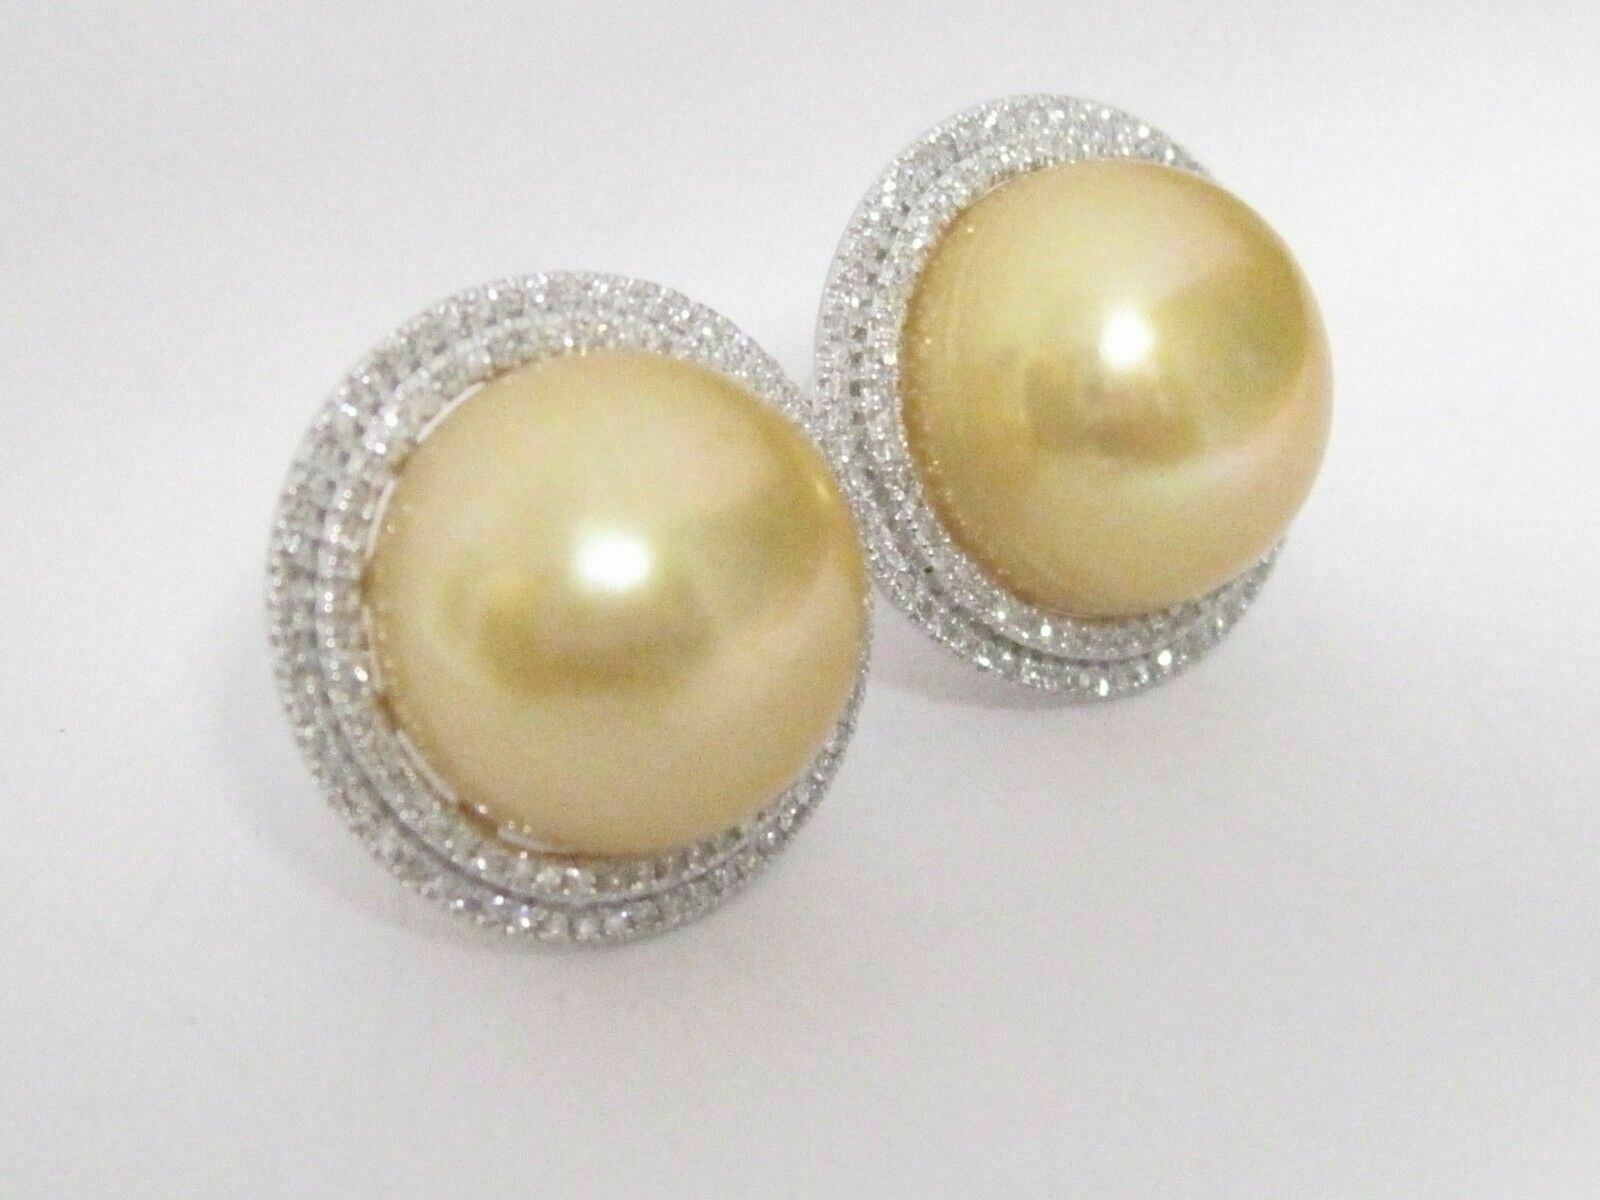 Fine 13mm Freshwater Yellow Gold Pearls Diamond Accent Earrings 14k White Gold